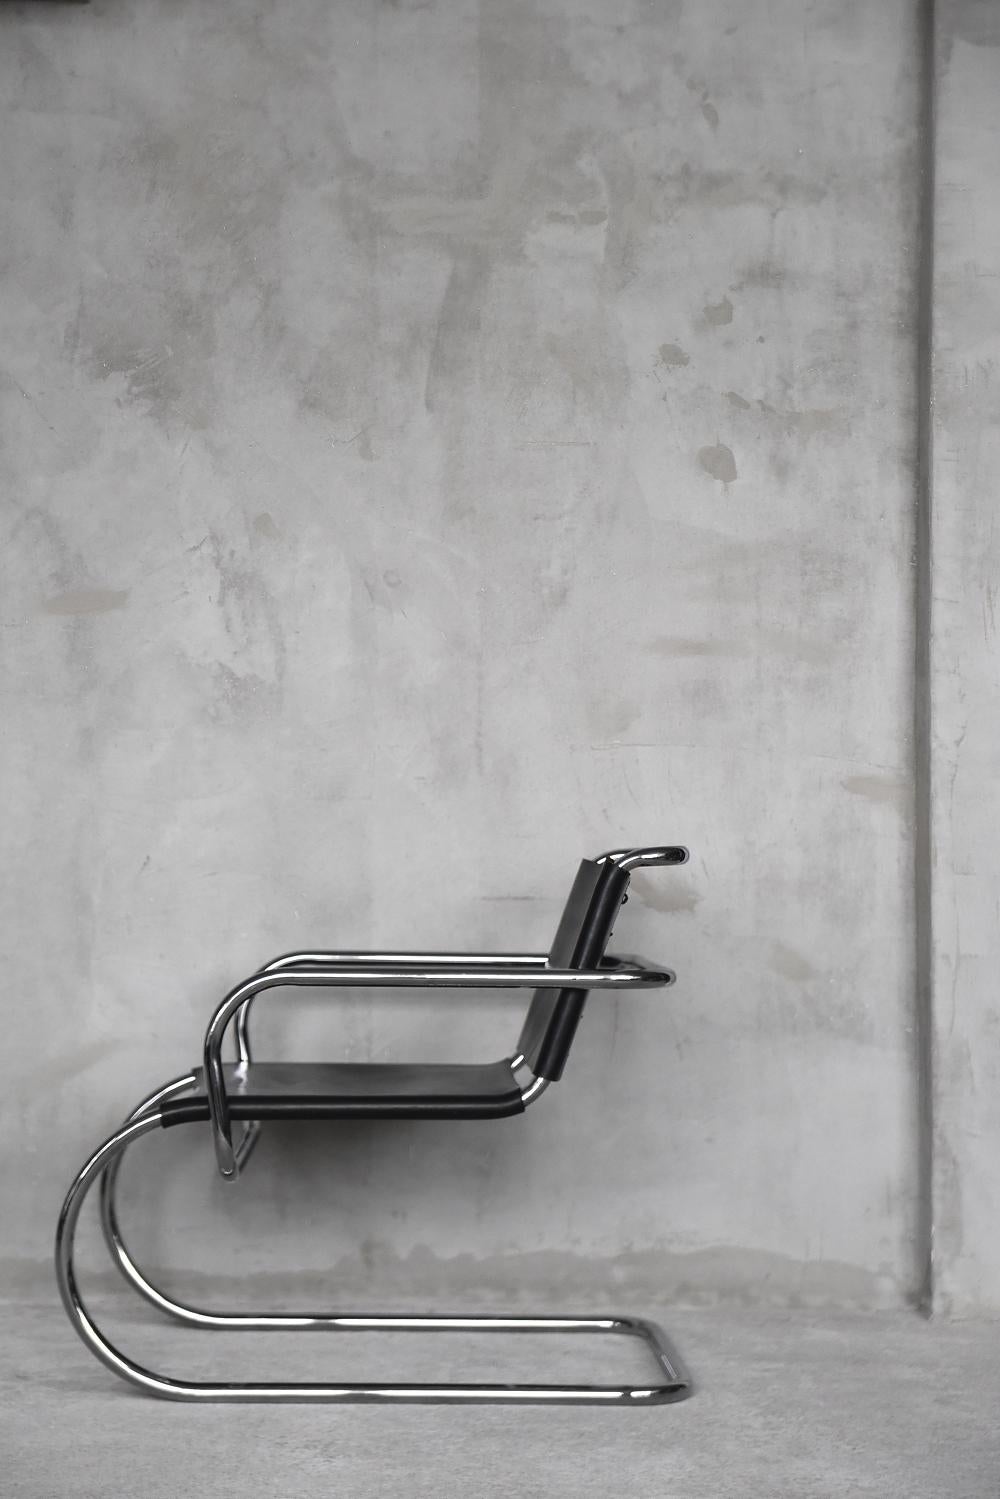 This exceptionally rare chair with arms was designed by Franco Albini in 1933 and produced by Tecta during the 1950s. The frame is made of tubular chrome-plated steel but the seat and back are made of real leather with beautiful natural patina. The